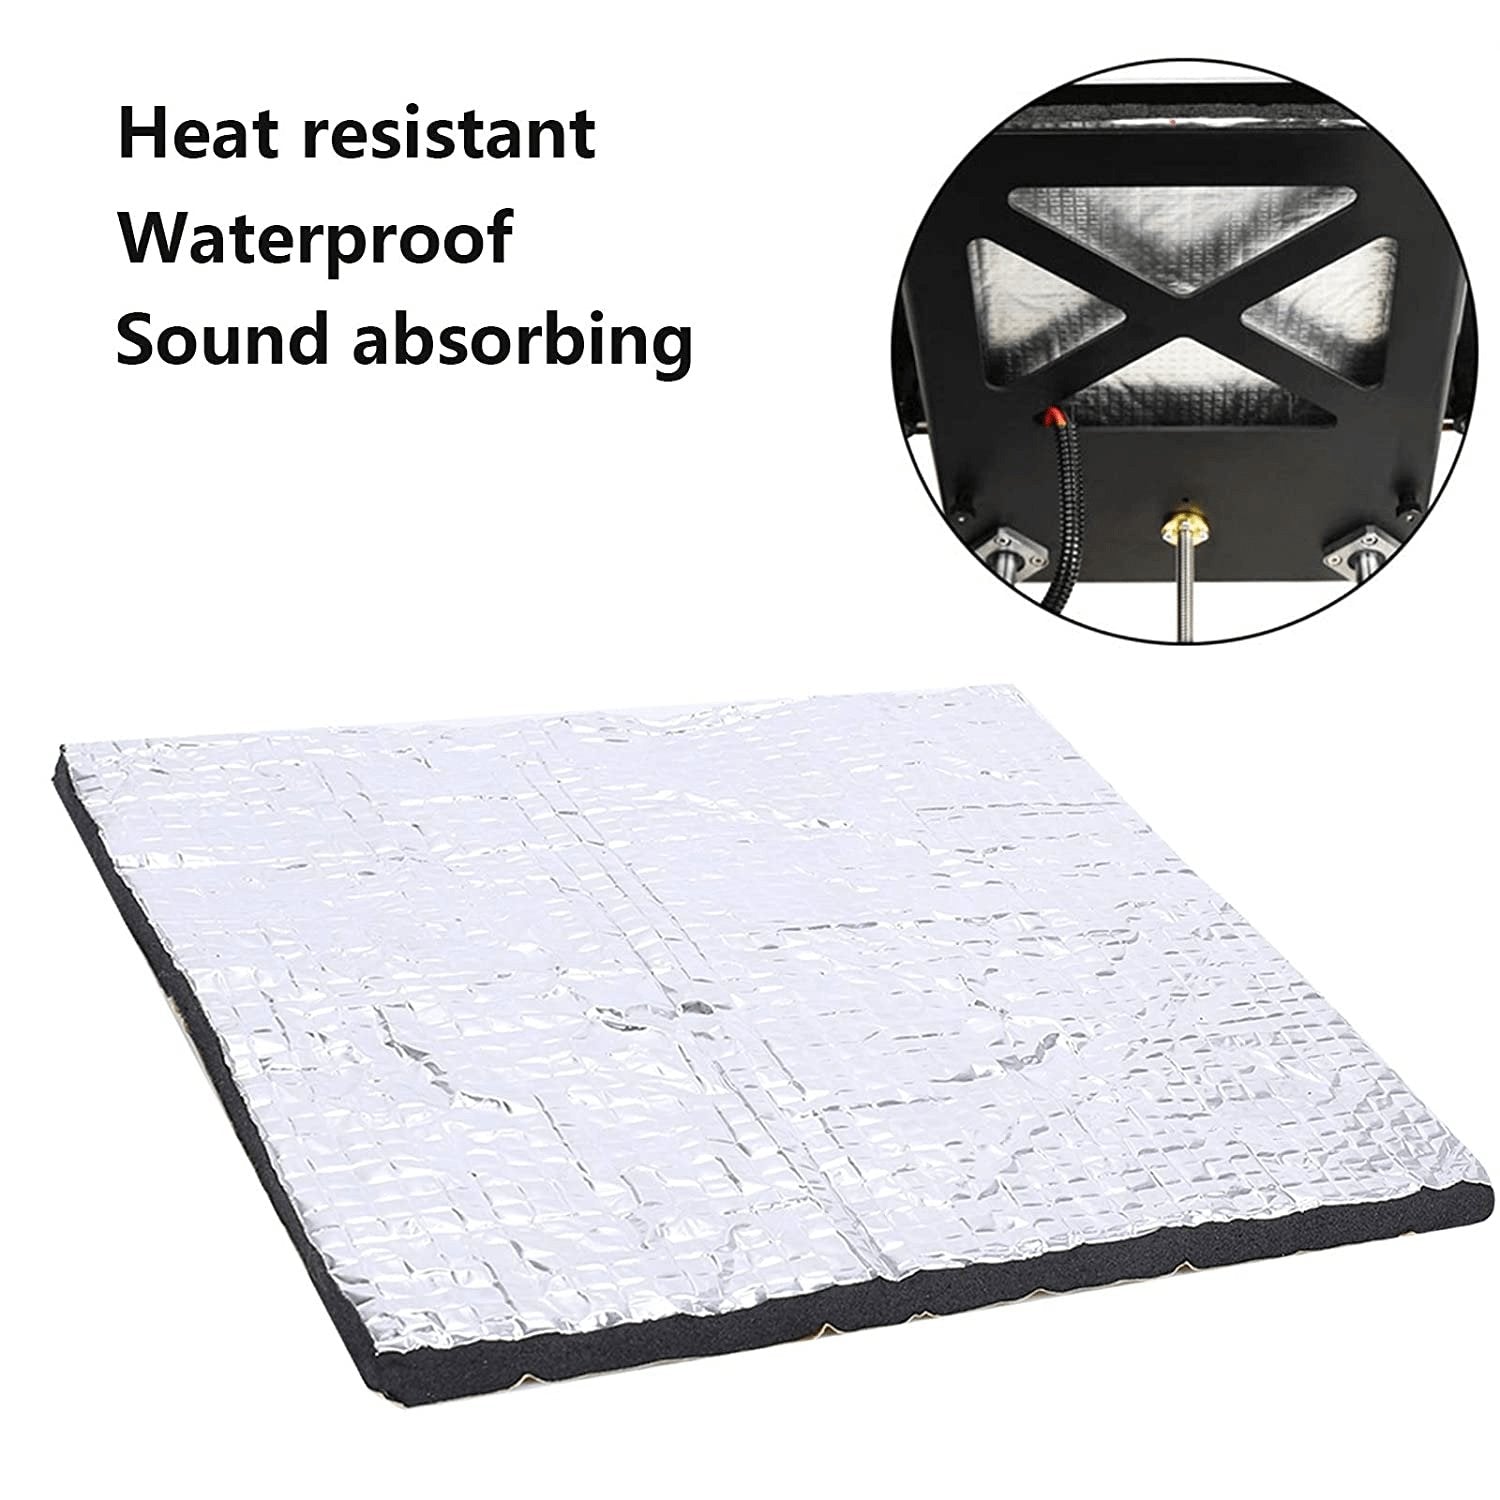 300*300mm Heated Bed Foil Self-Adhesive Insulation Cotton Mat for 3D Printer Heatbed